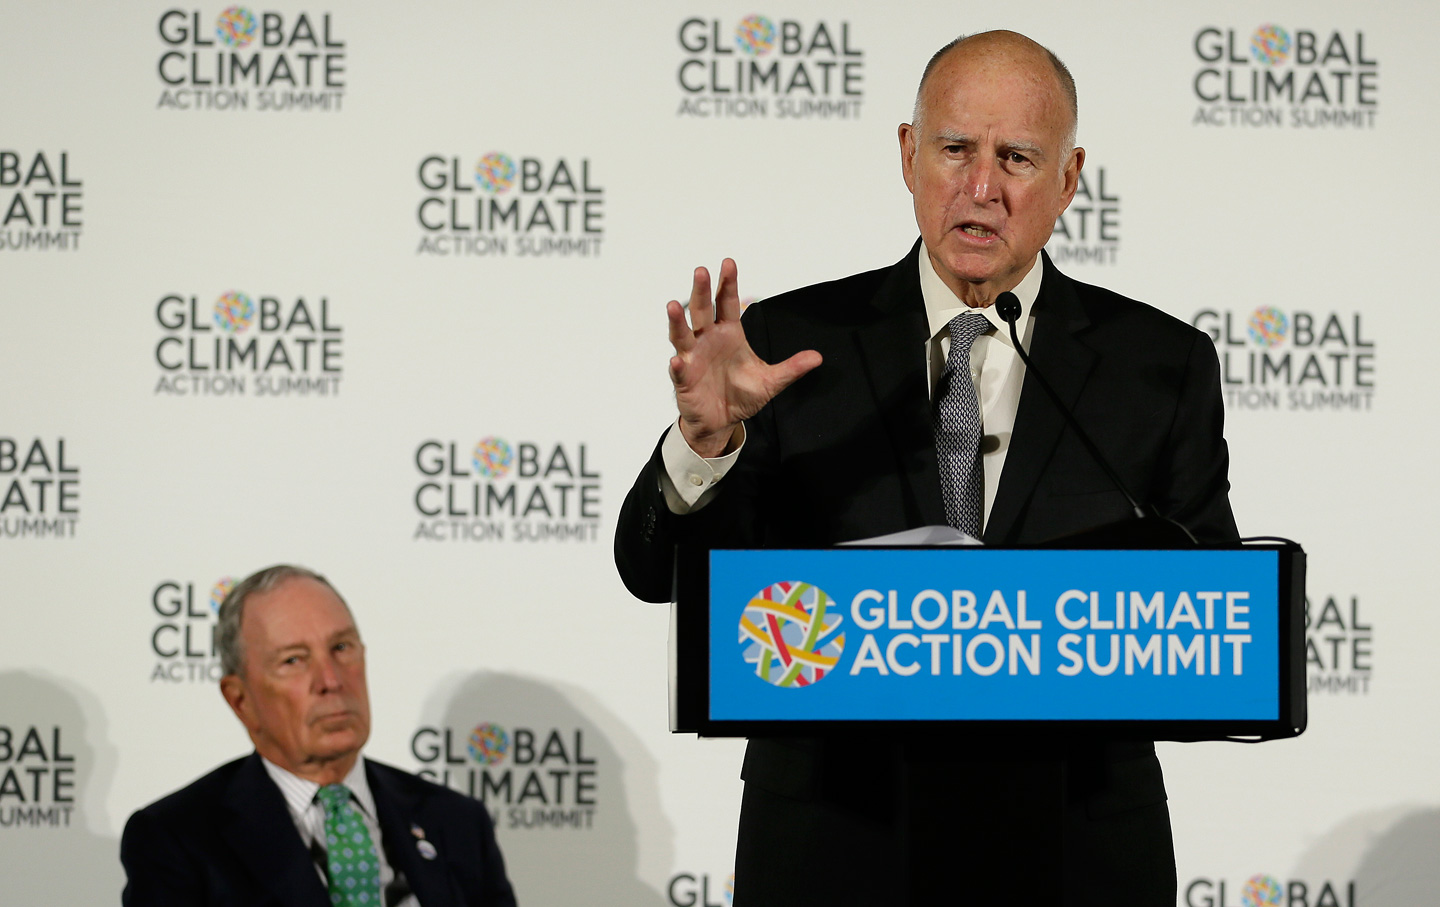 At the Global Climate Action Summit, Brown and Bloomberg Make Bold New Pledges